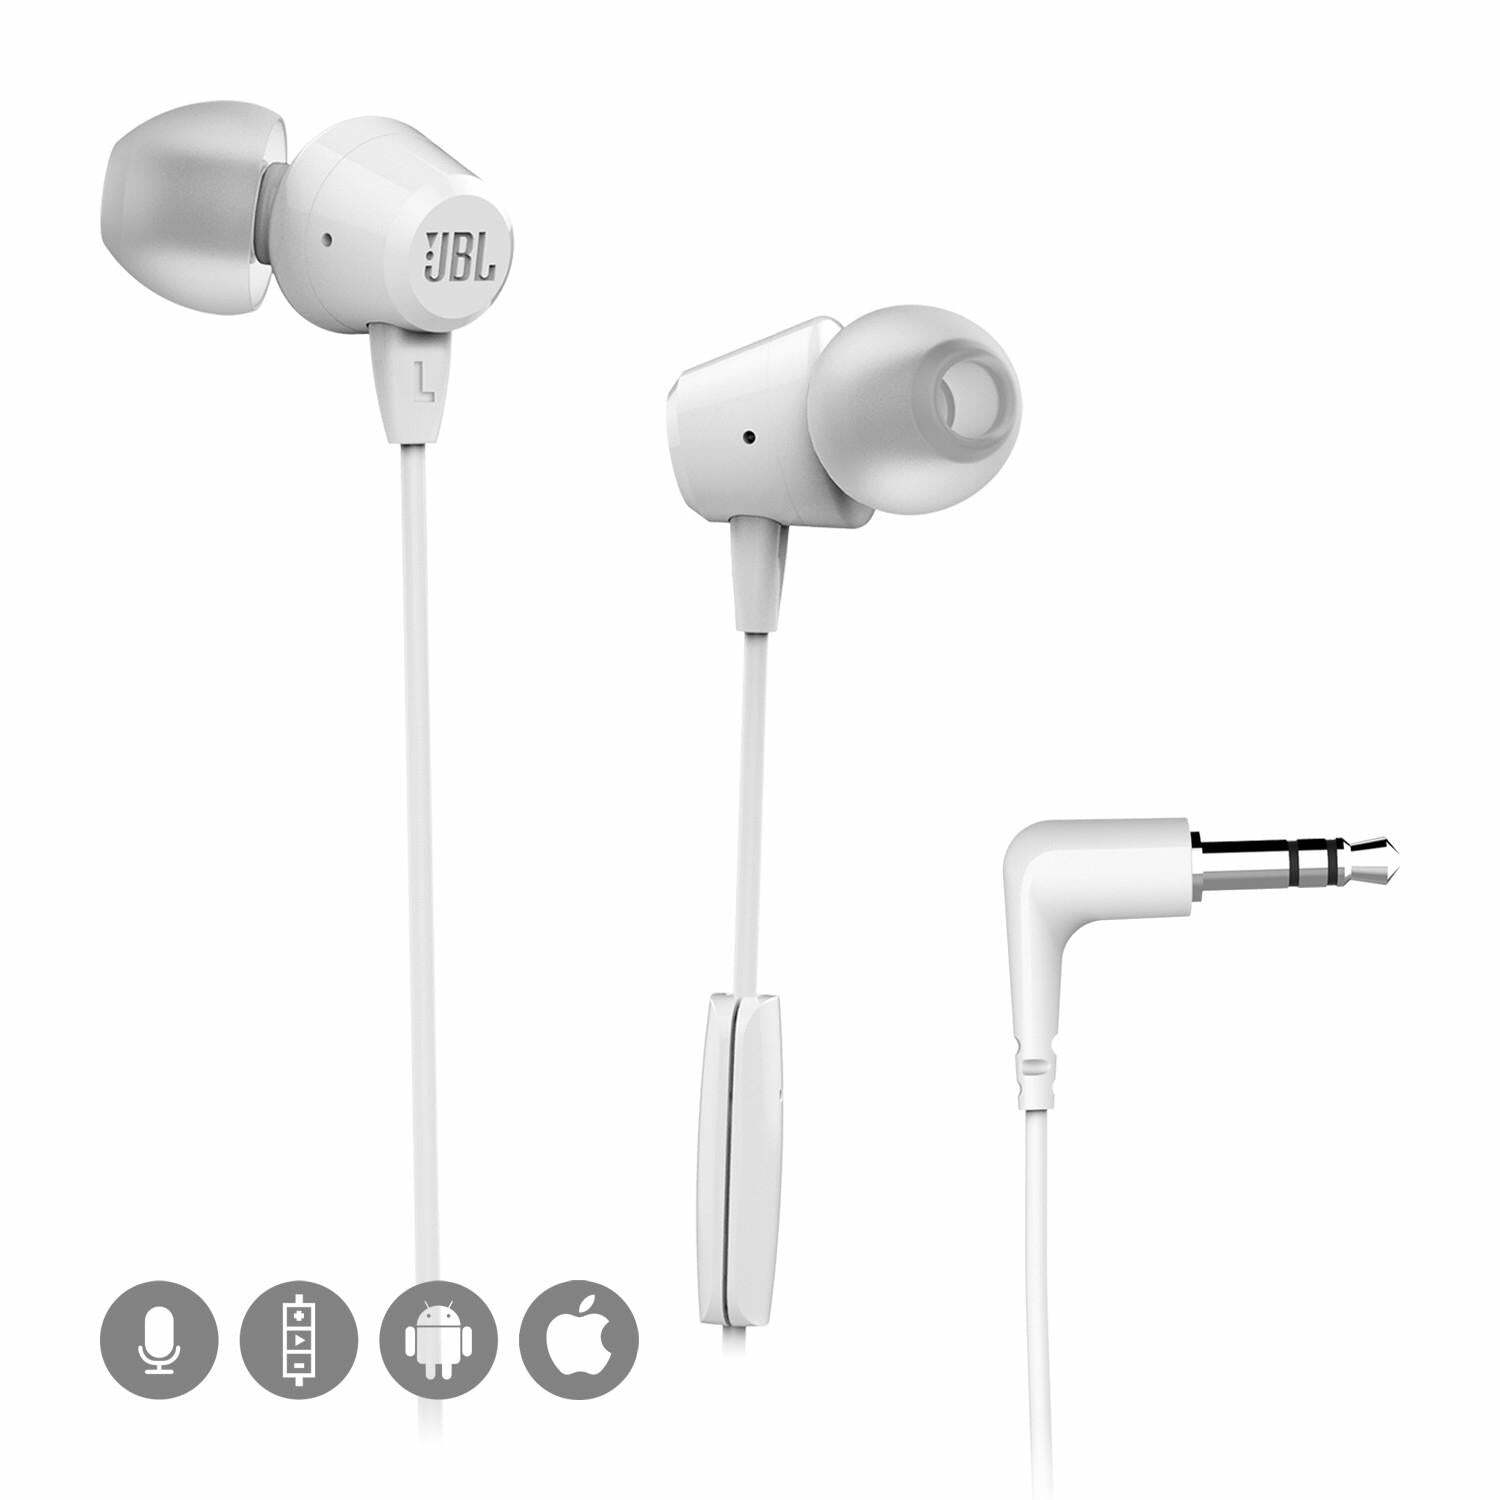 JBL - C50HI In-Ear Wired Headphones 3.5 mm with Mic, White